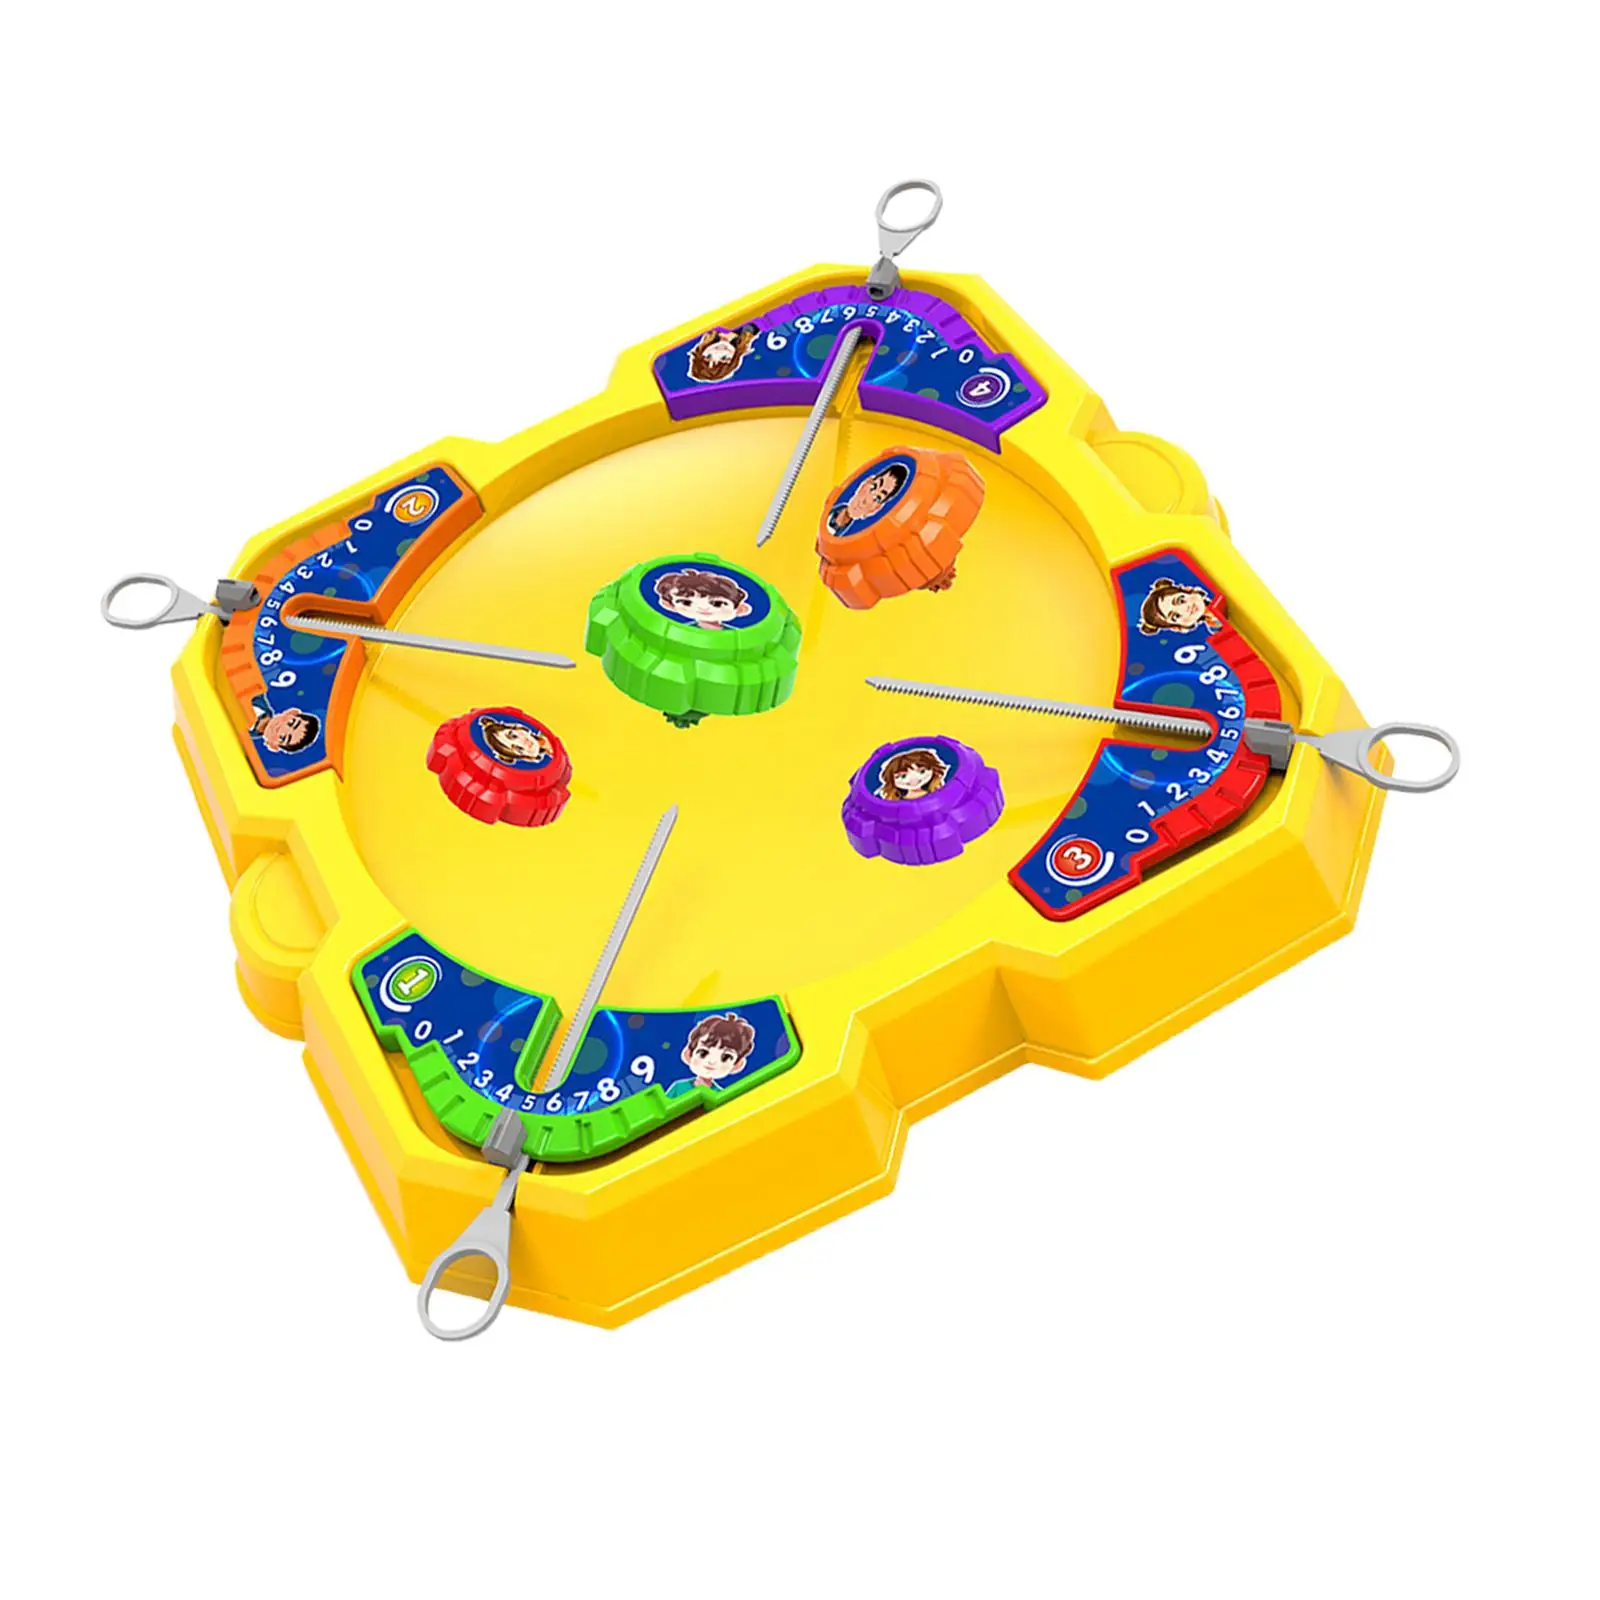 Gyro Toy Set Battling Game Activity Toy Durable for Desktop Parties Unisex